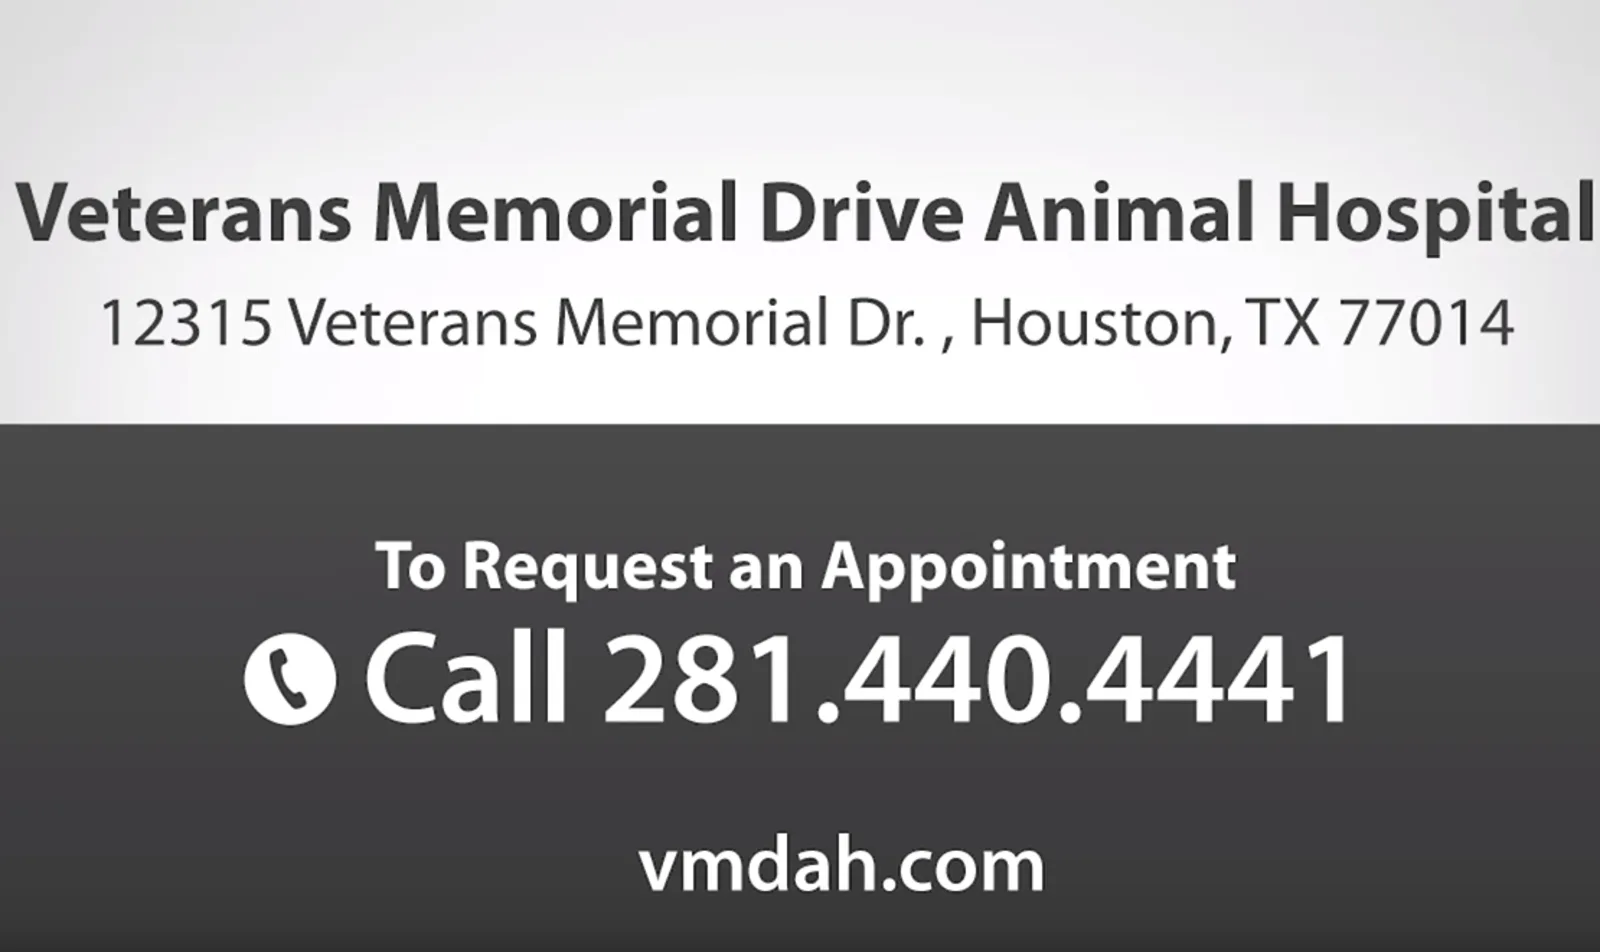 Welcome to the Veterans Memorial Drive Animal Hospital 